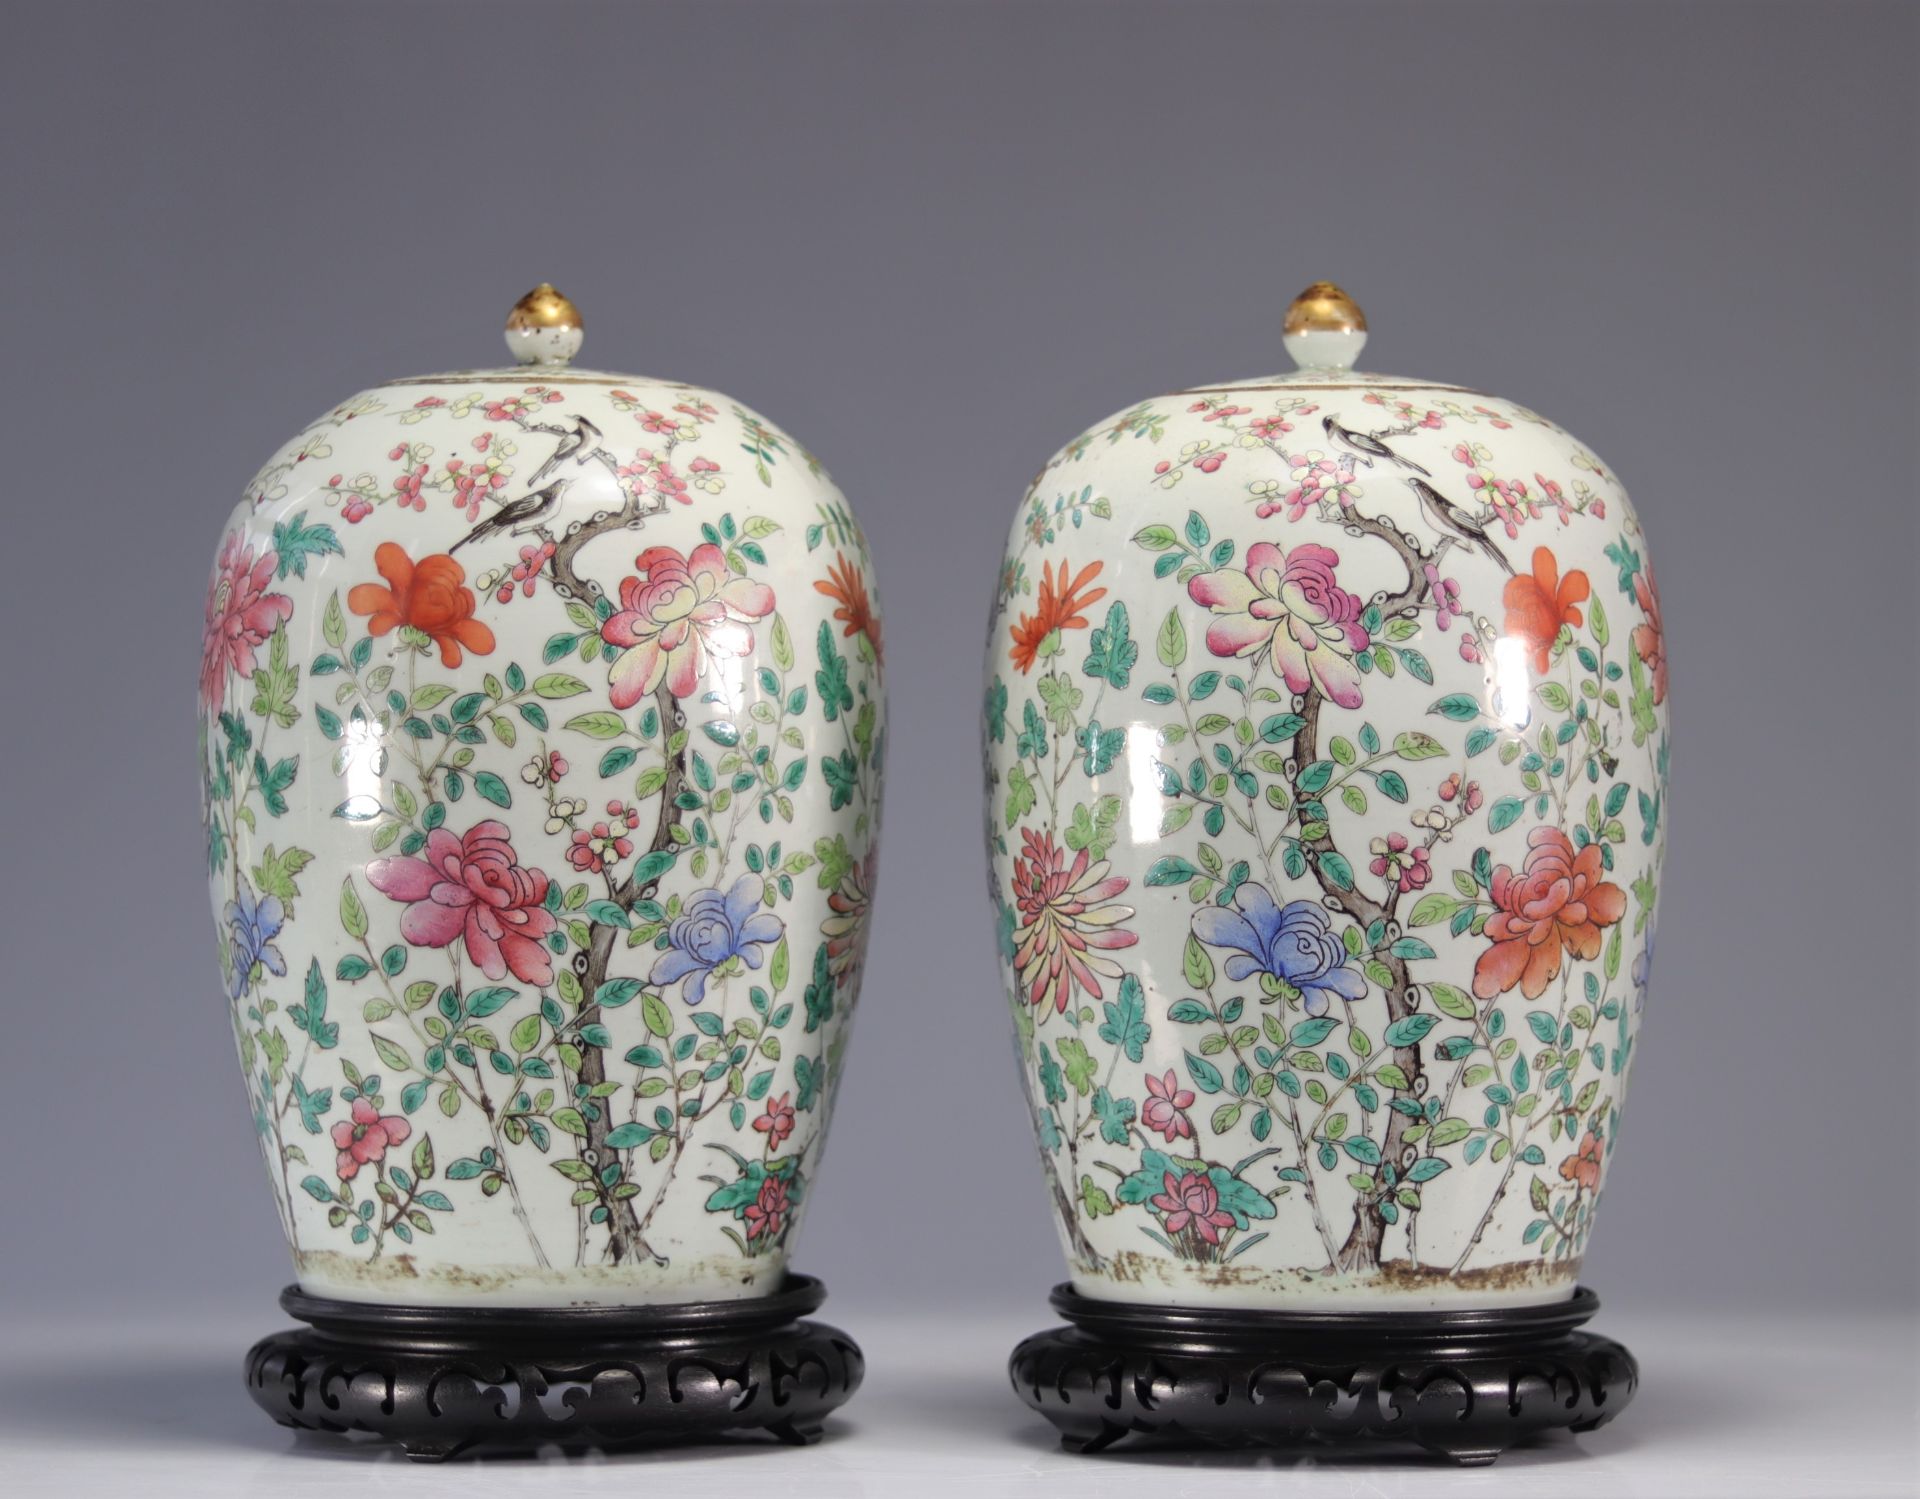 Pair of covered vases in famille rose porcelain with floral and bird decoration - Image 4 of 5